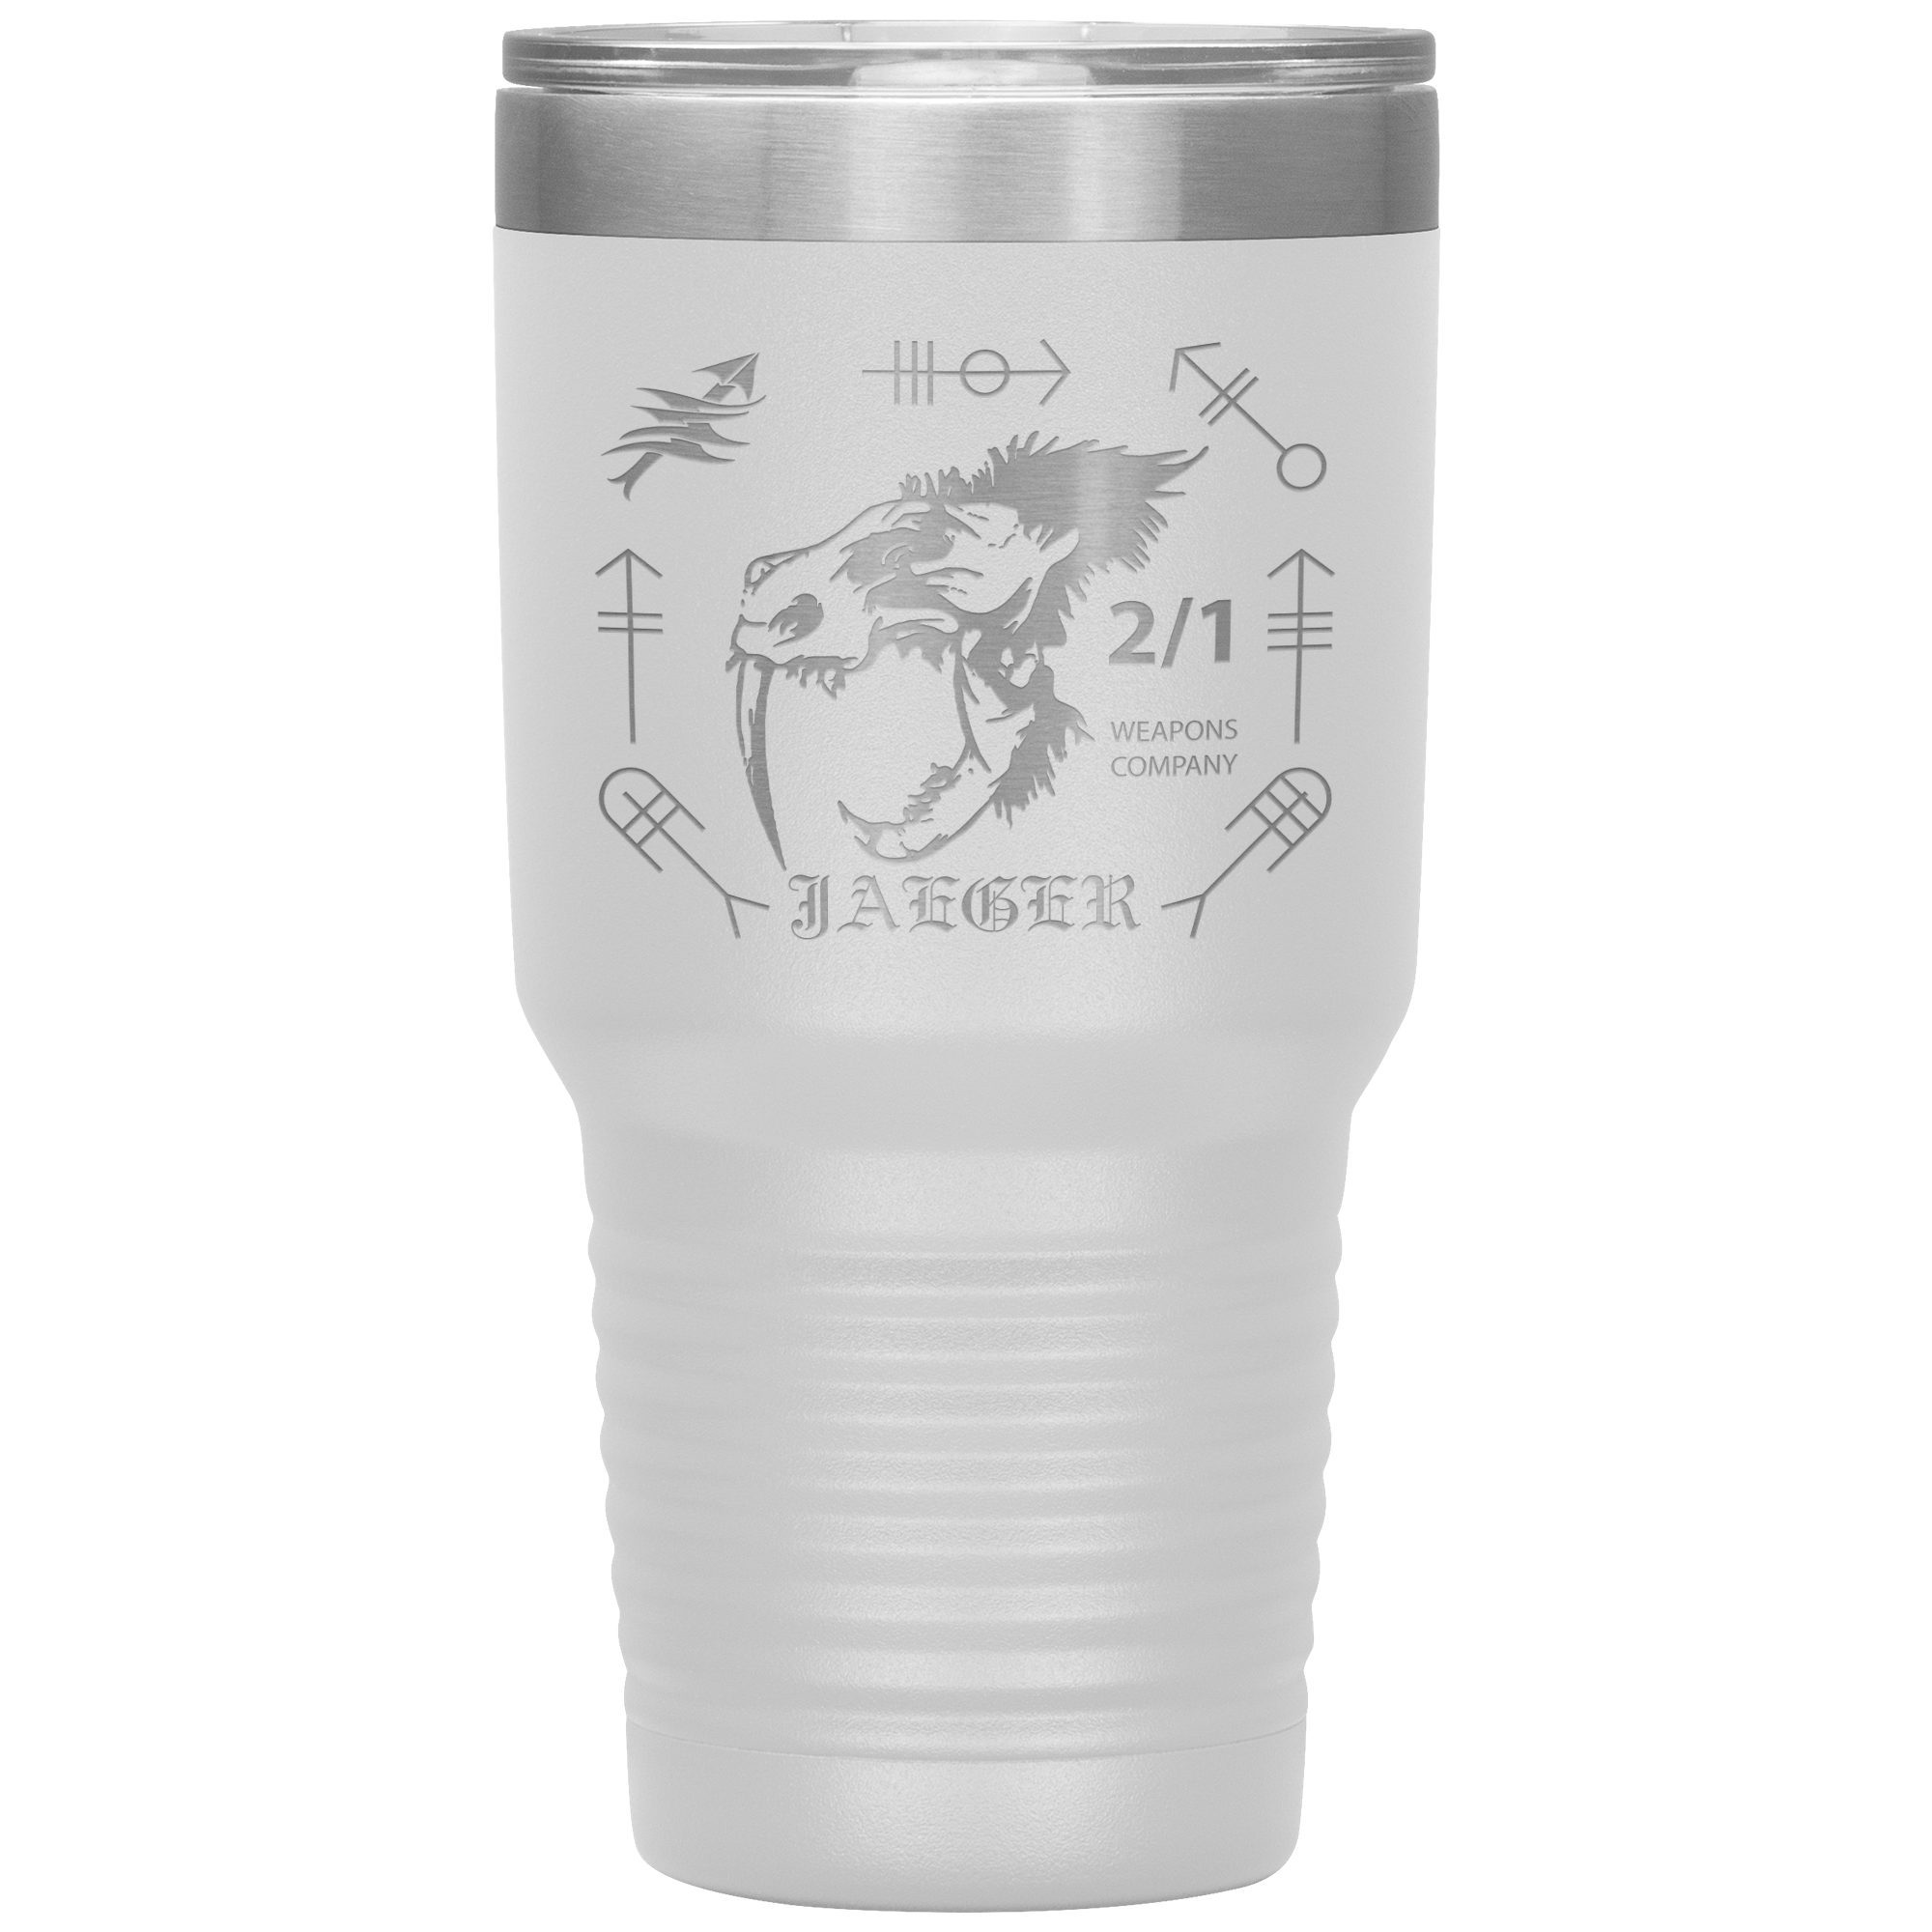 JAEGER WEAPONS CO 2ND BN 1ST MARINES 30 oz TUMBLER